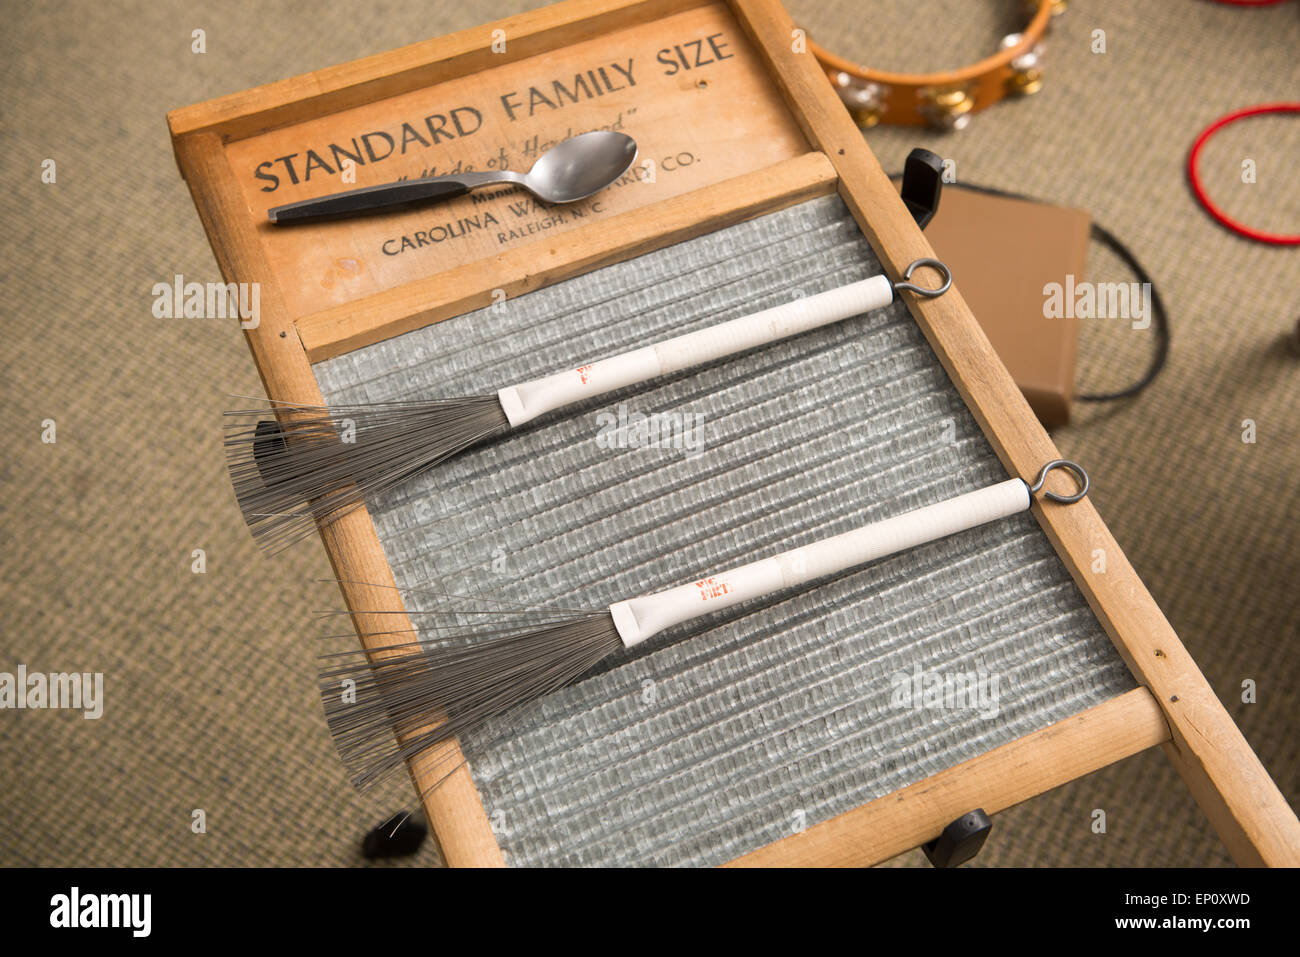 homemade musical instrument using wire brushes in Baltimore, Maryland Stock Photo